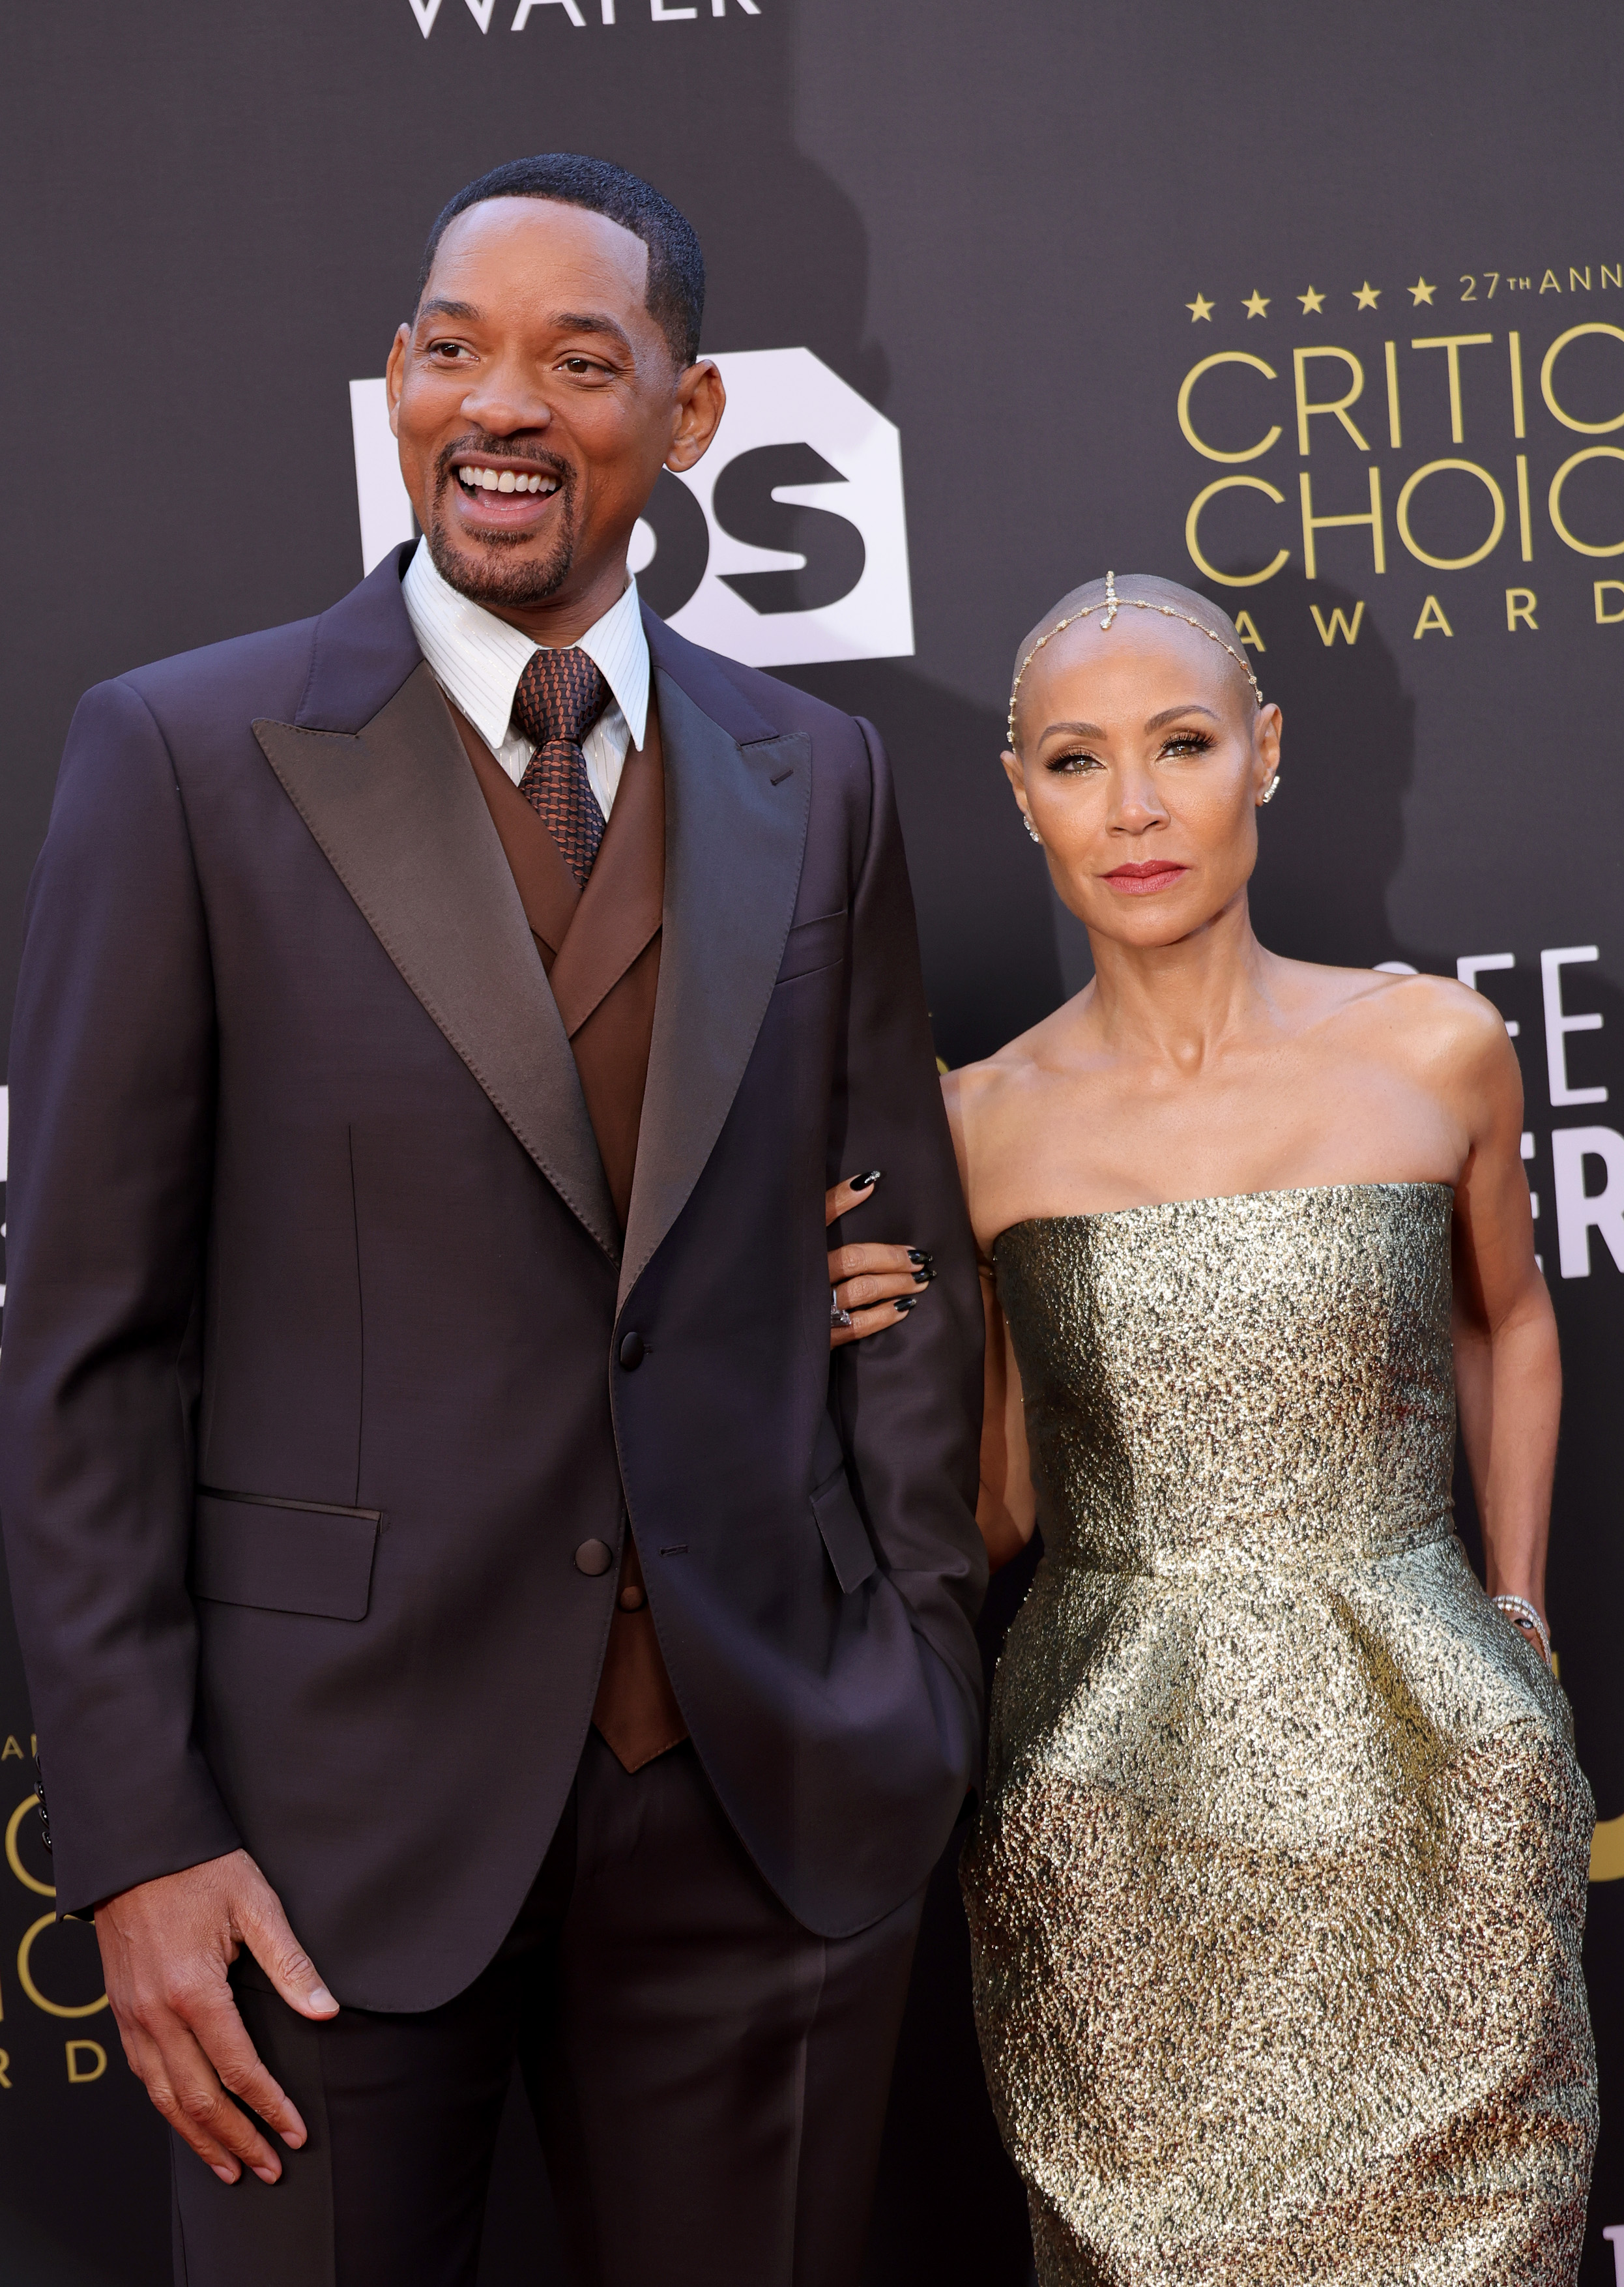 Will Smith and Jada Pinkett Smith at the 27th Annual Critics Choice Awards in Los Angeles, California on March 13, 2022. | Source: Getty Images